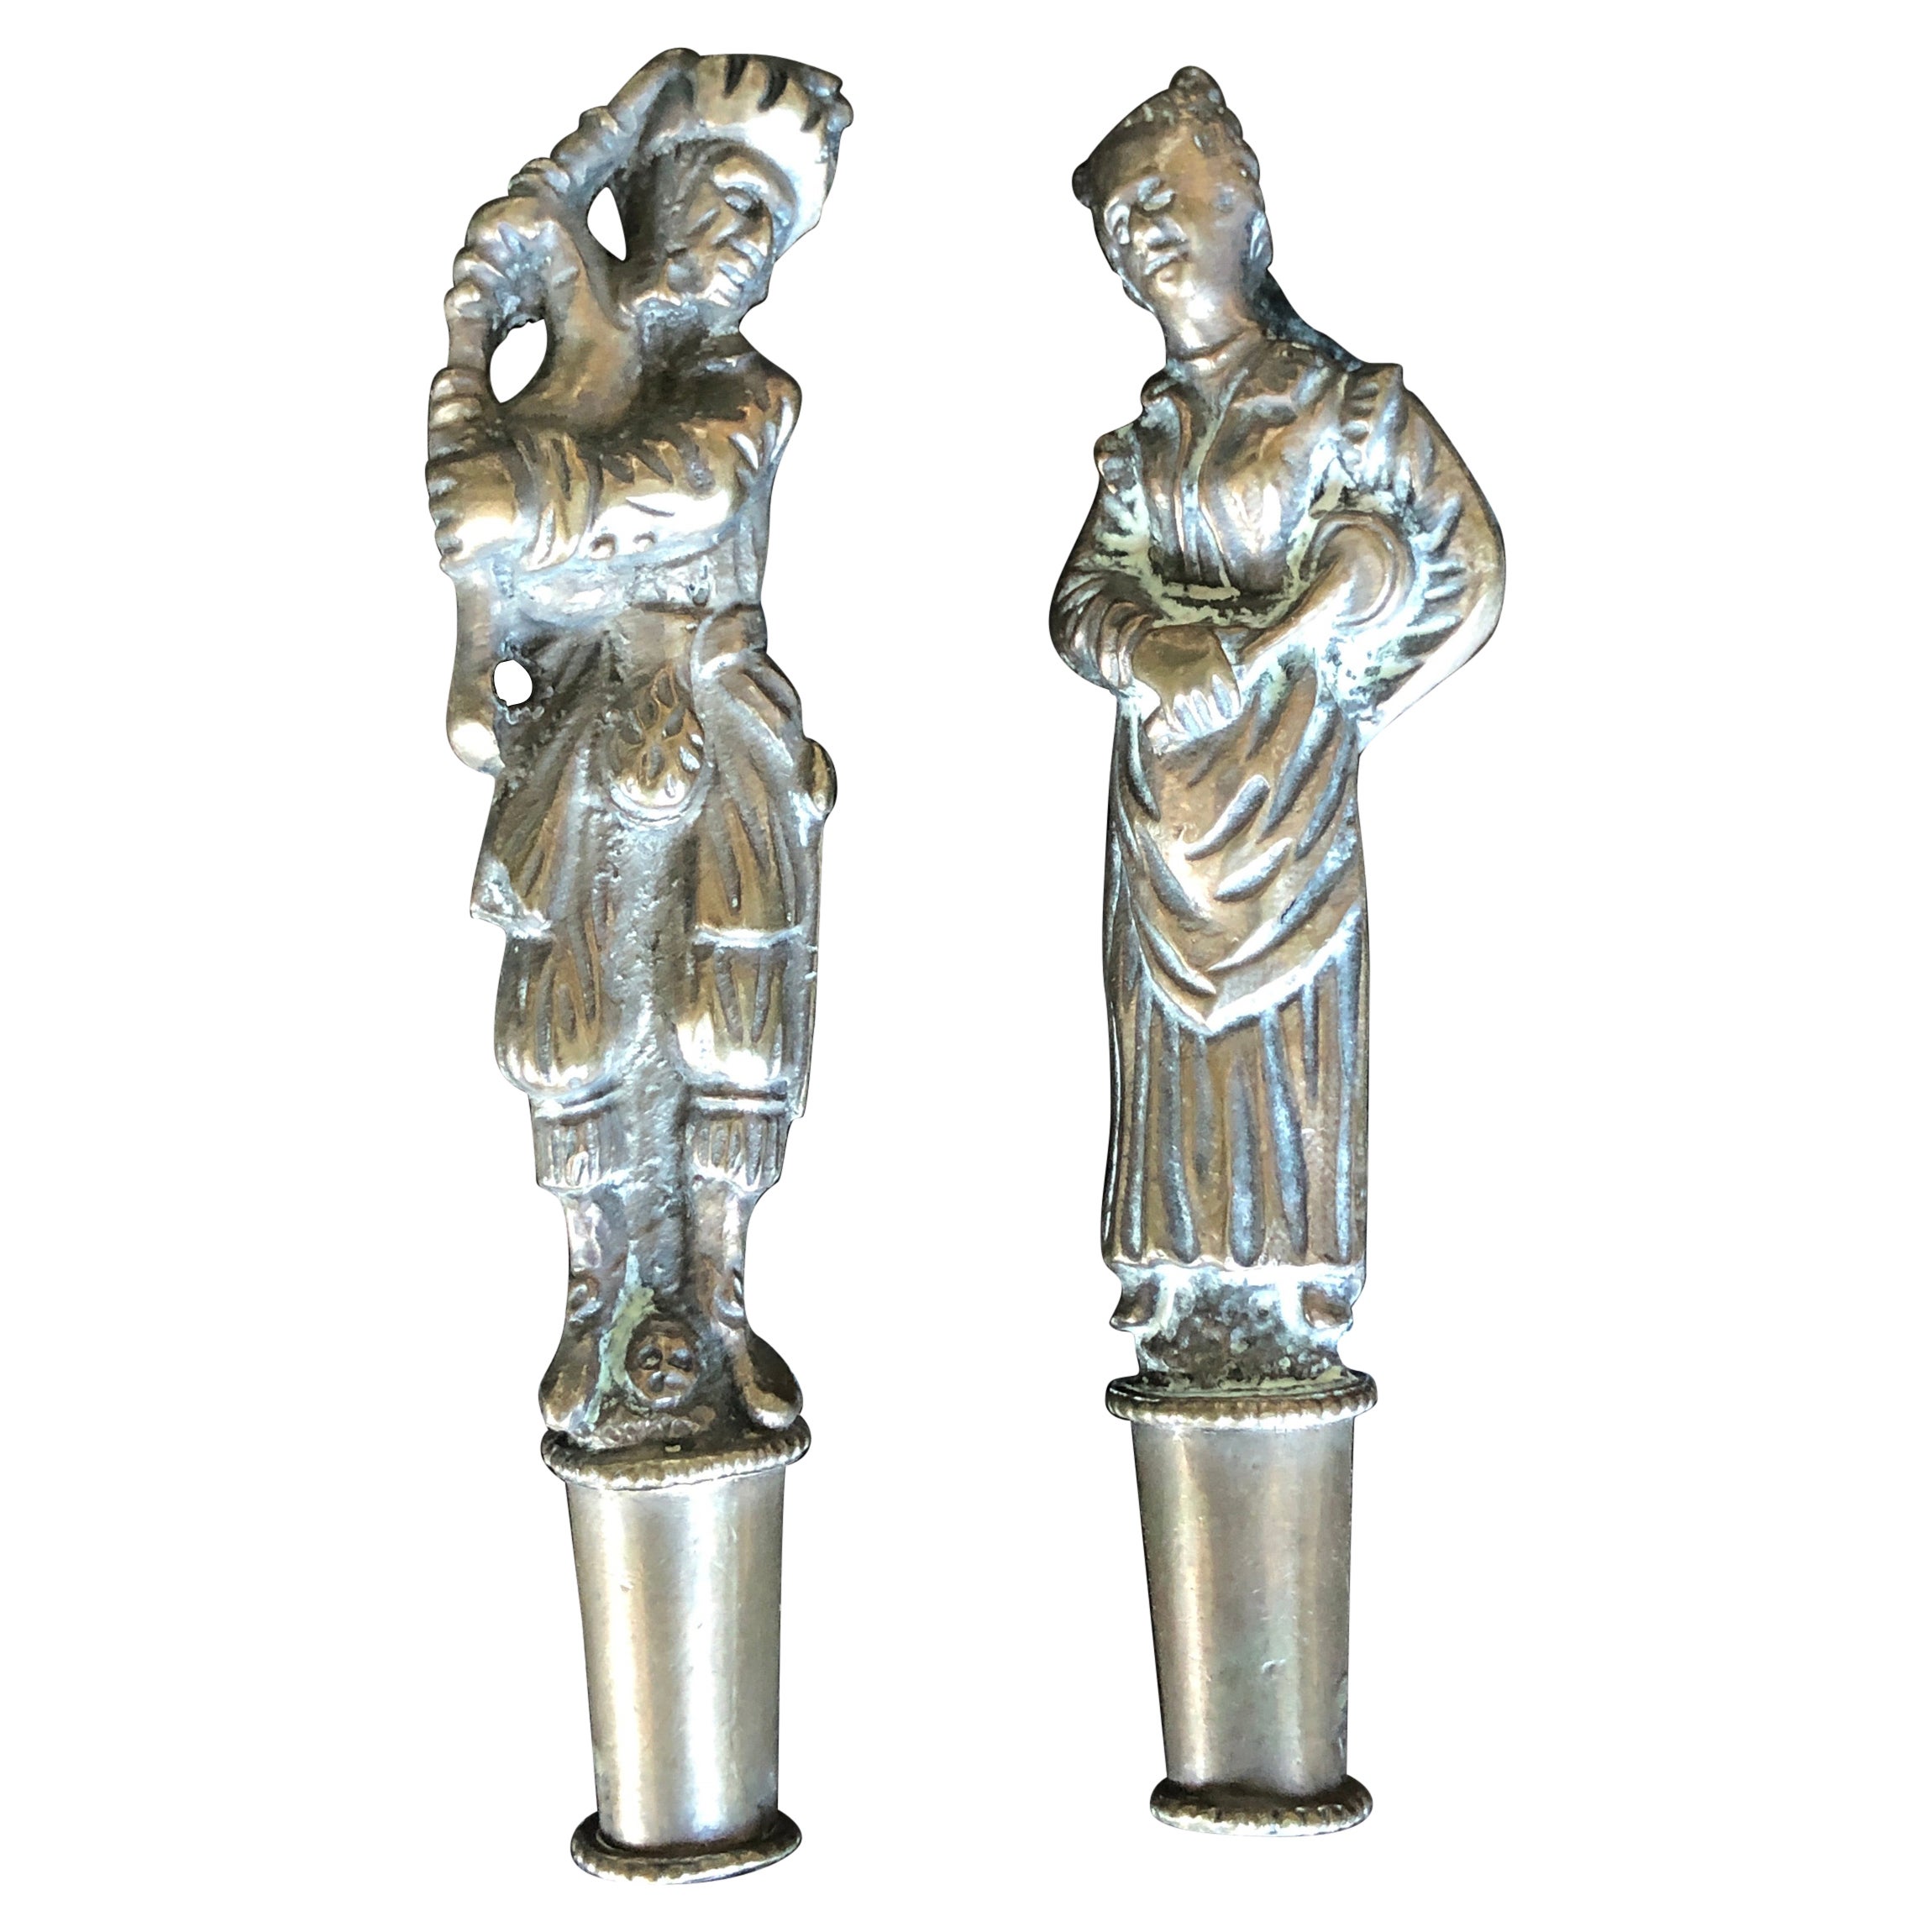 French Pair of Bronze Cachets Depicting a Bagpipe Player and a Drummer